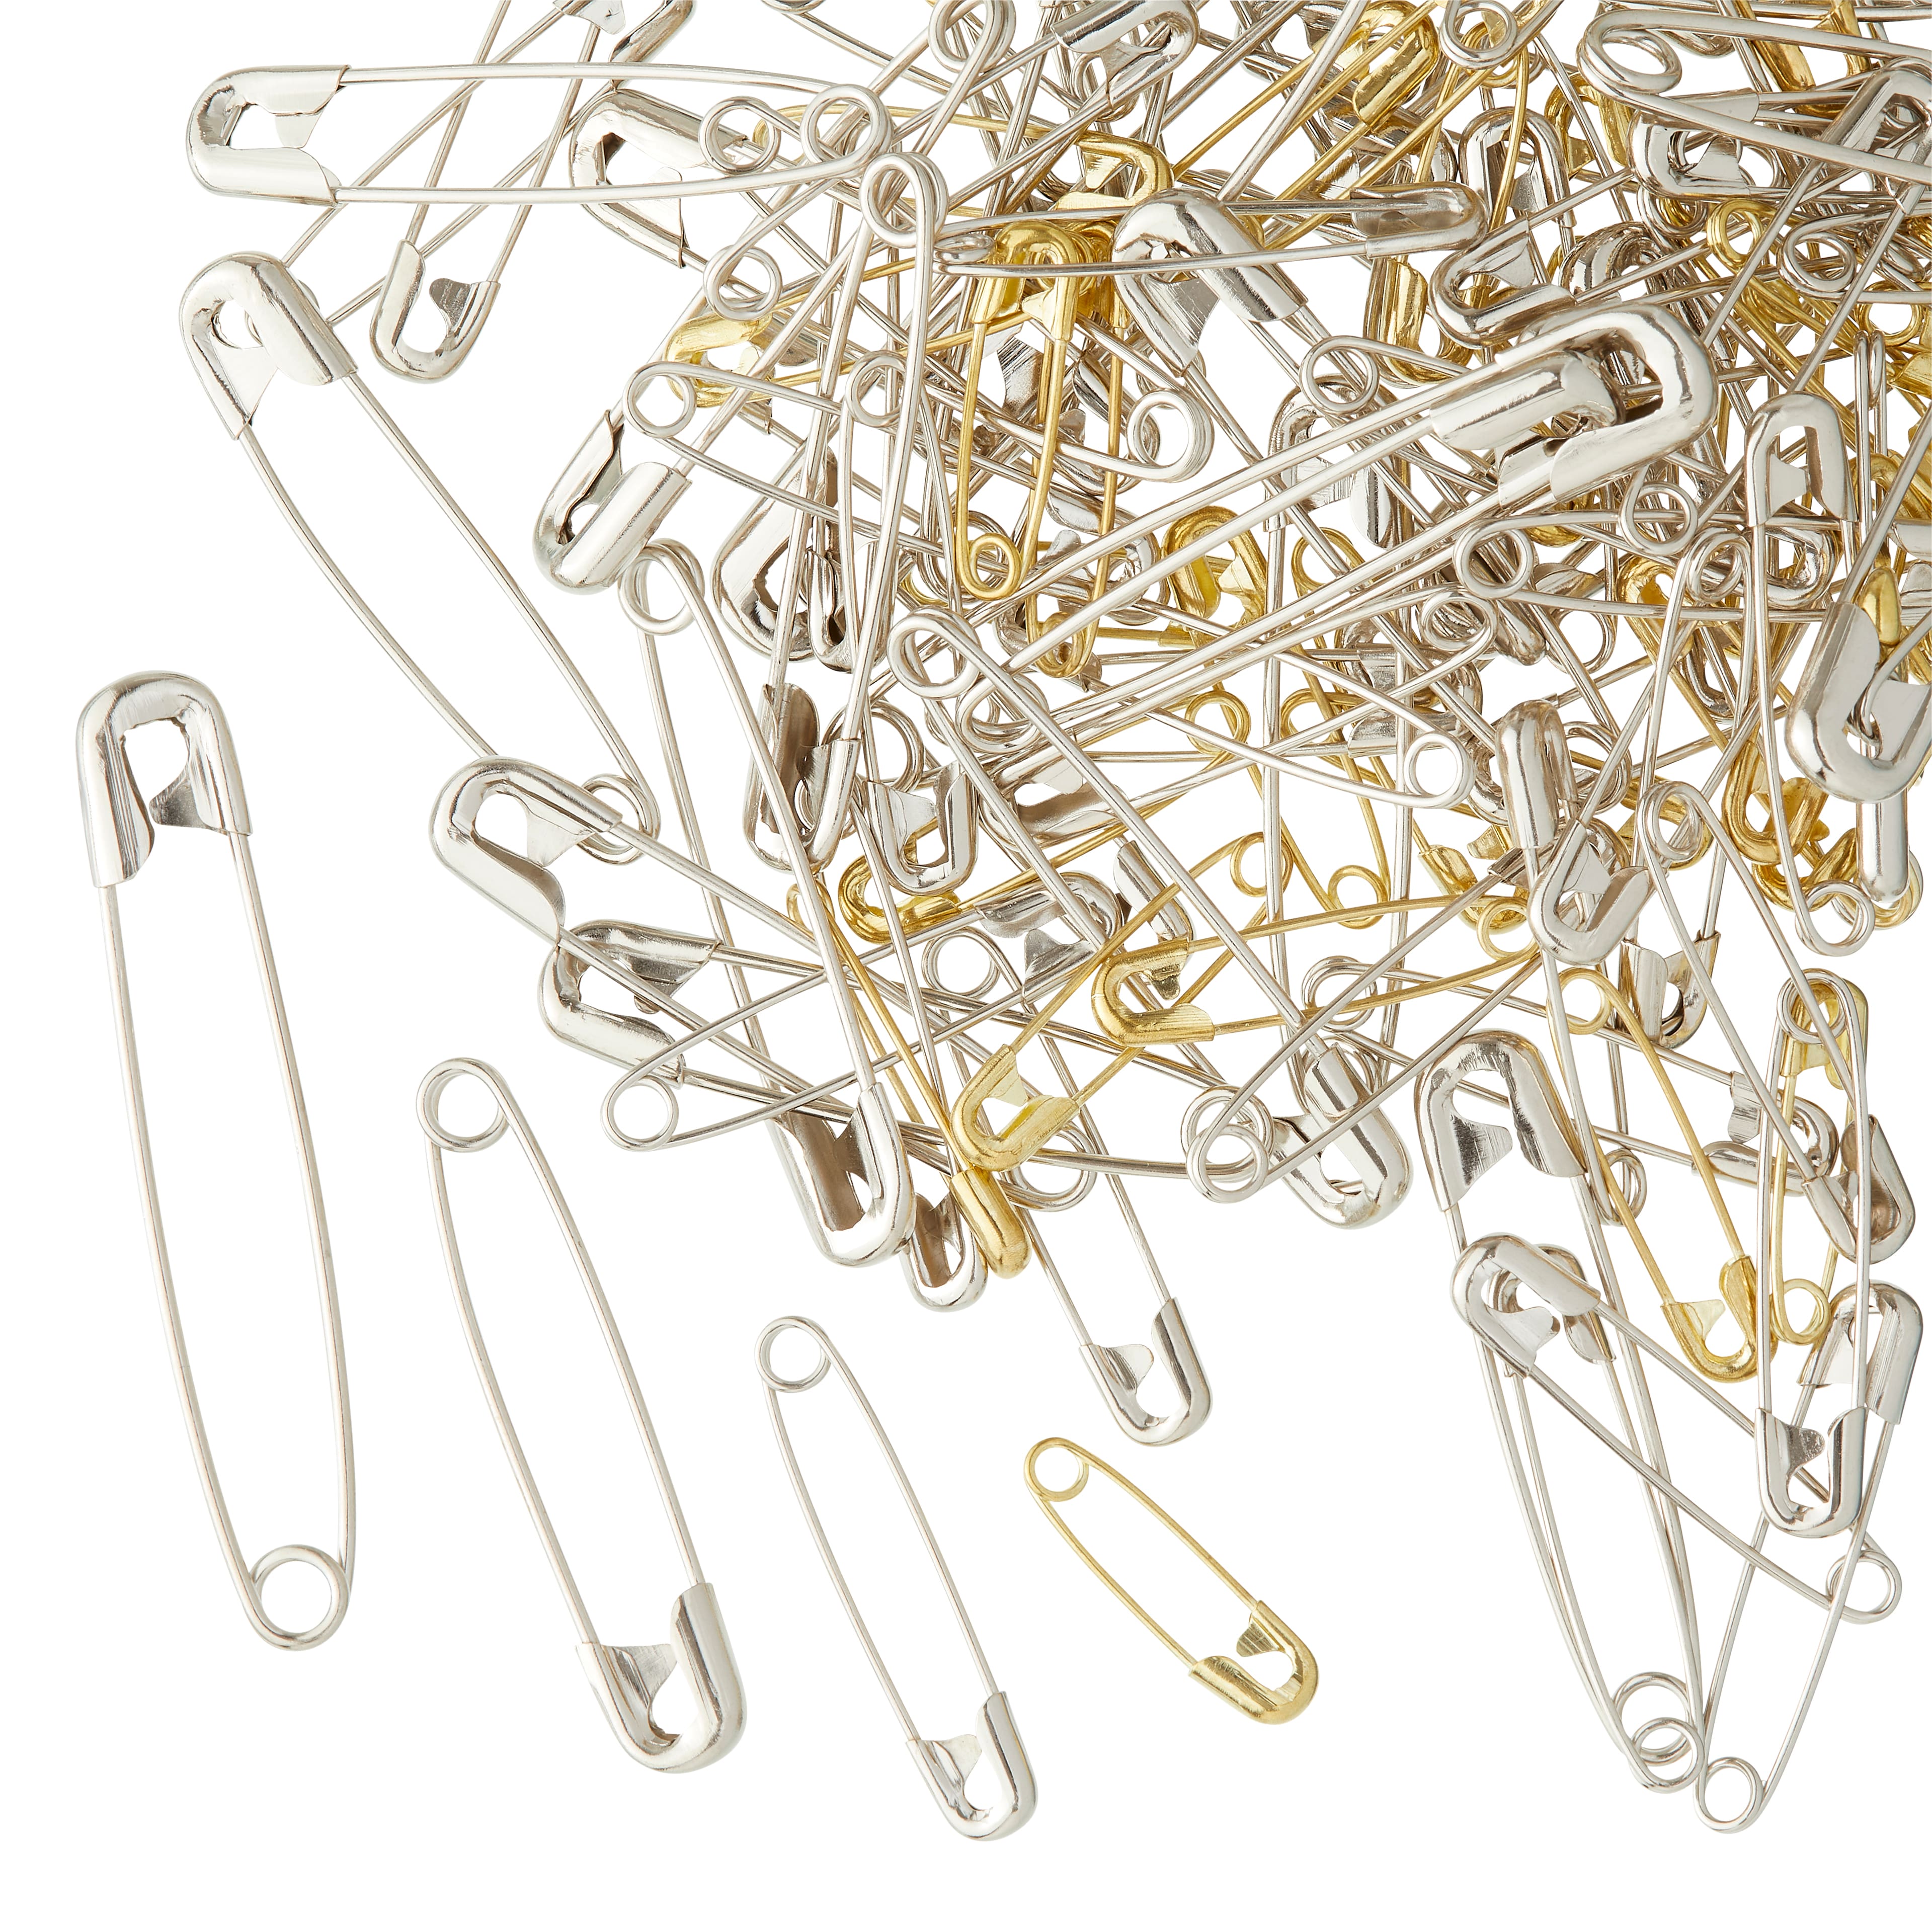 Loops & Threads Medium Silver & Gold Assortment Safety Pins - 225 ct